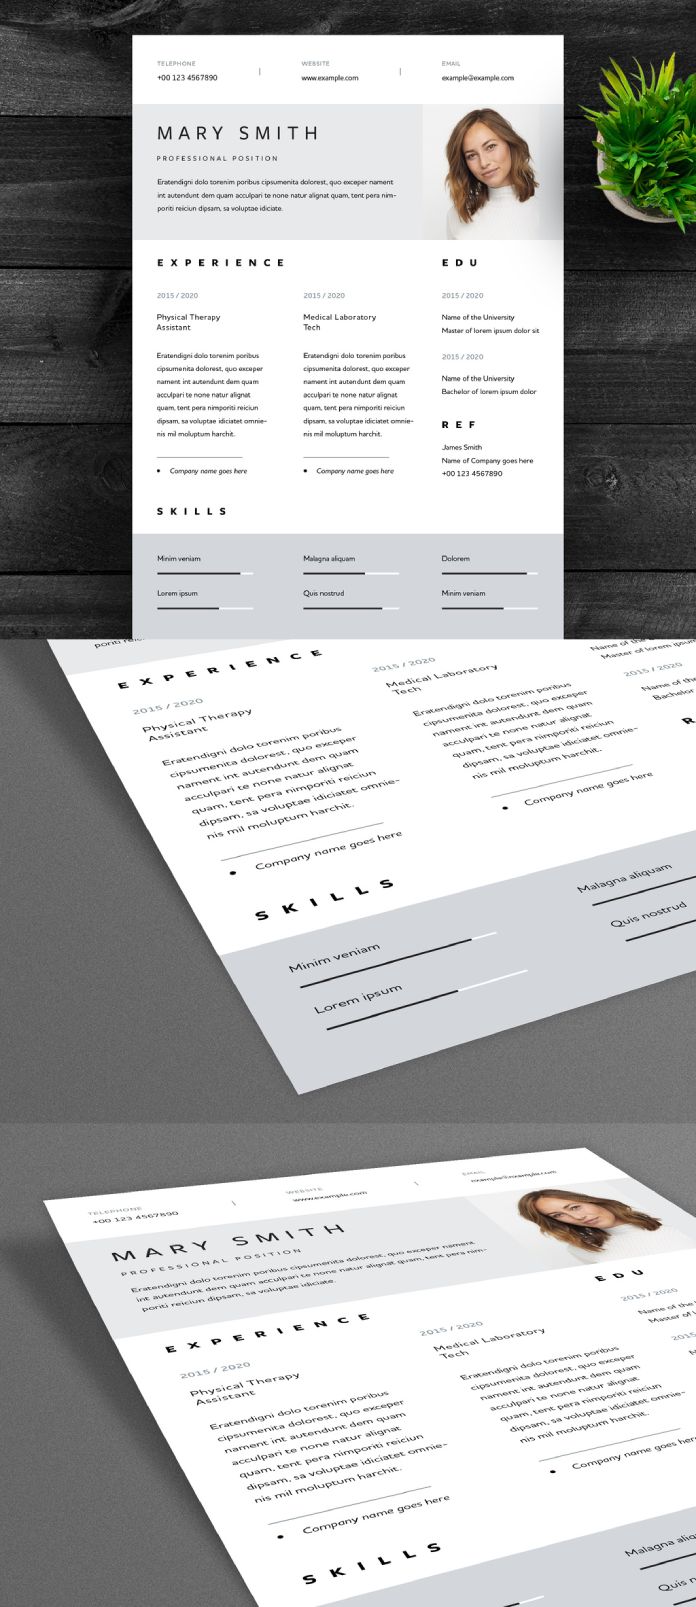 Resume InDesign Template with Gray Header and Footer Areas